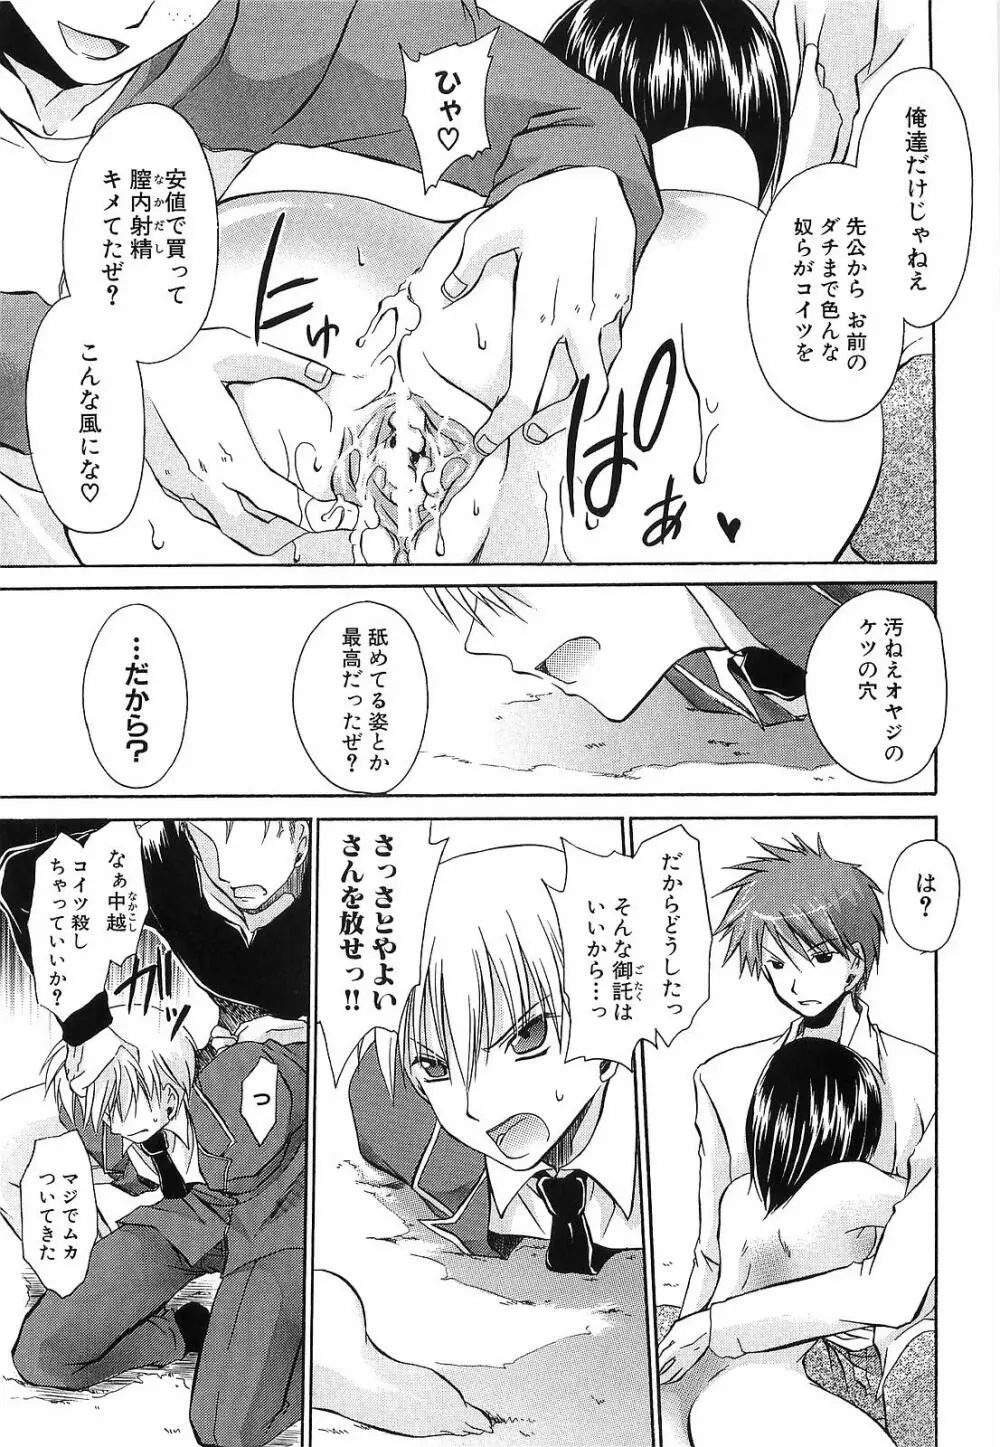 LOVE & HATE 3 FINAL～ENGAGE～通常版 Page.84